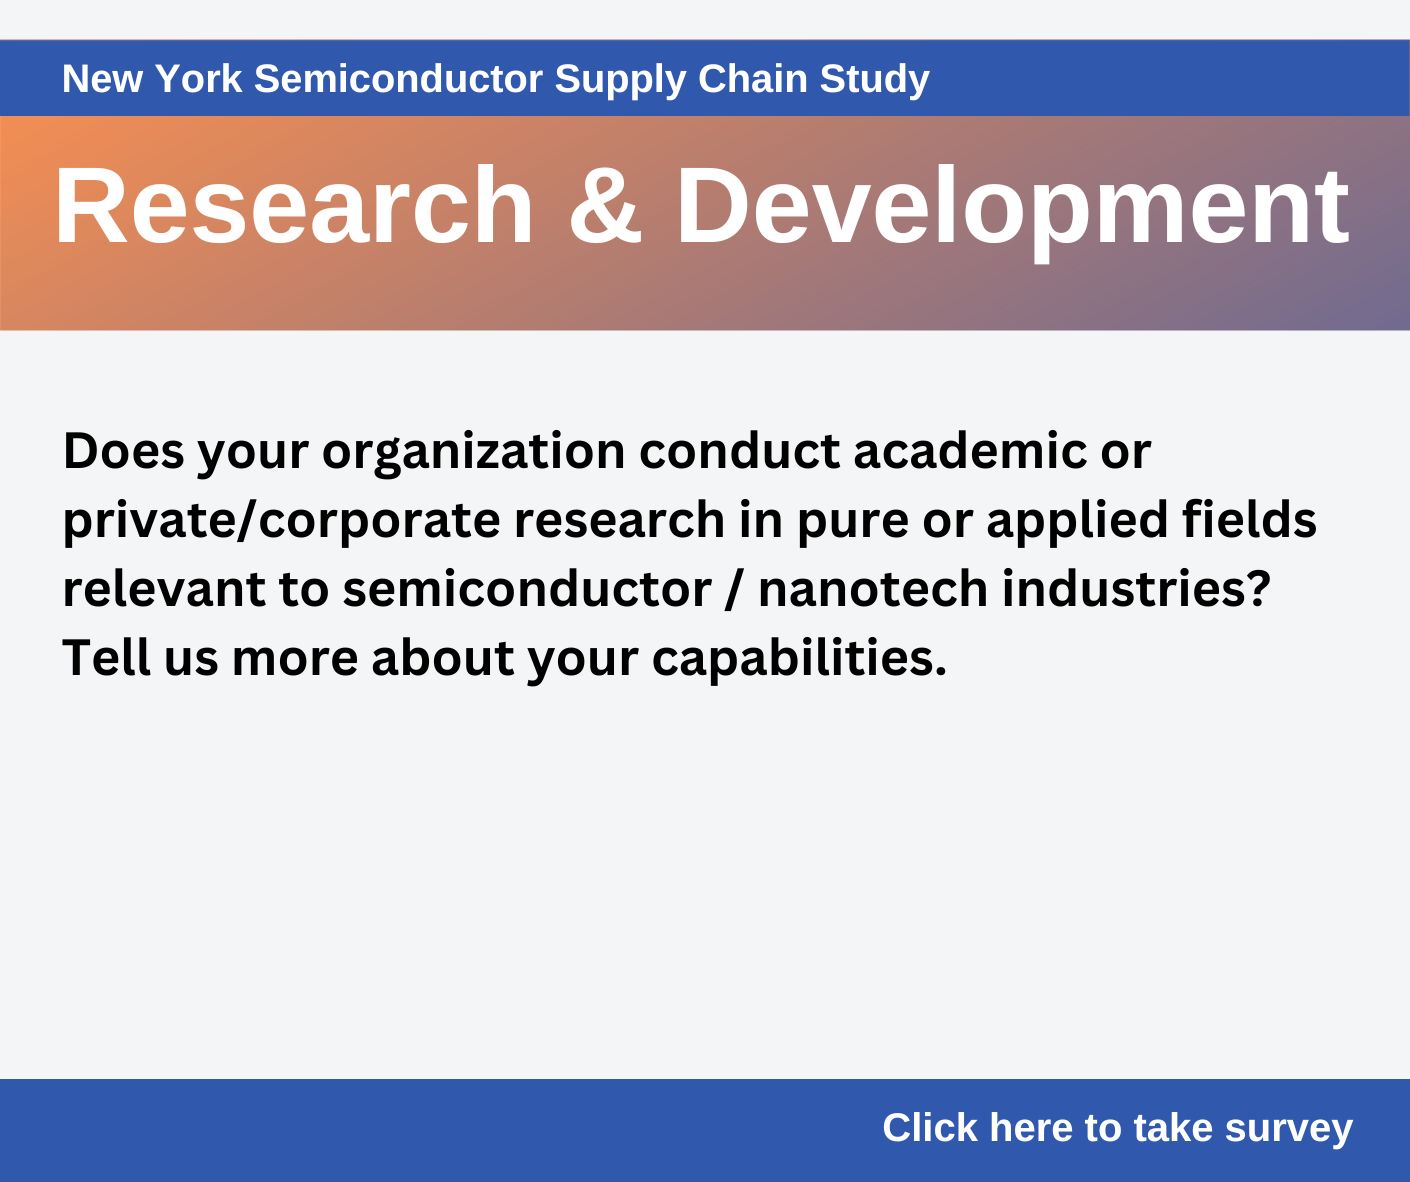 Does your organization conduct academic or private/corporate research in pure or applied fields relevant to semiconductor/ nanotech industries? Tell us more about your capabilities. Take the survey.